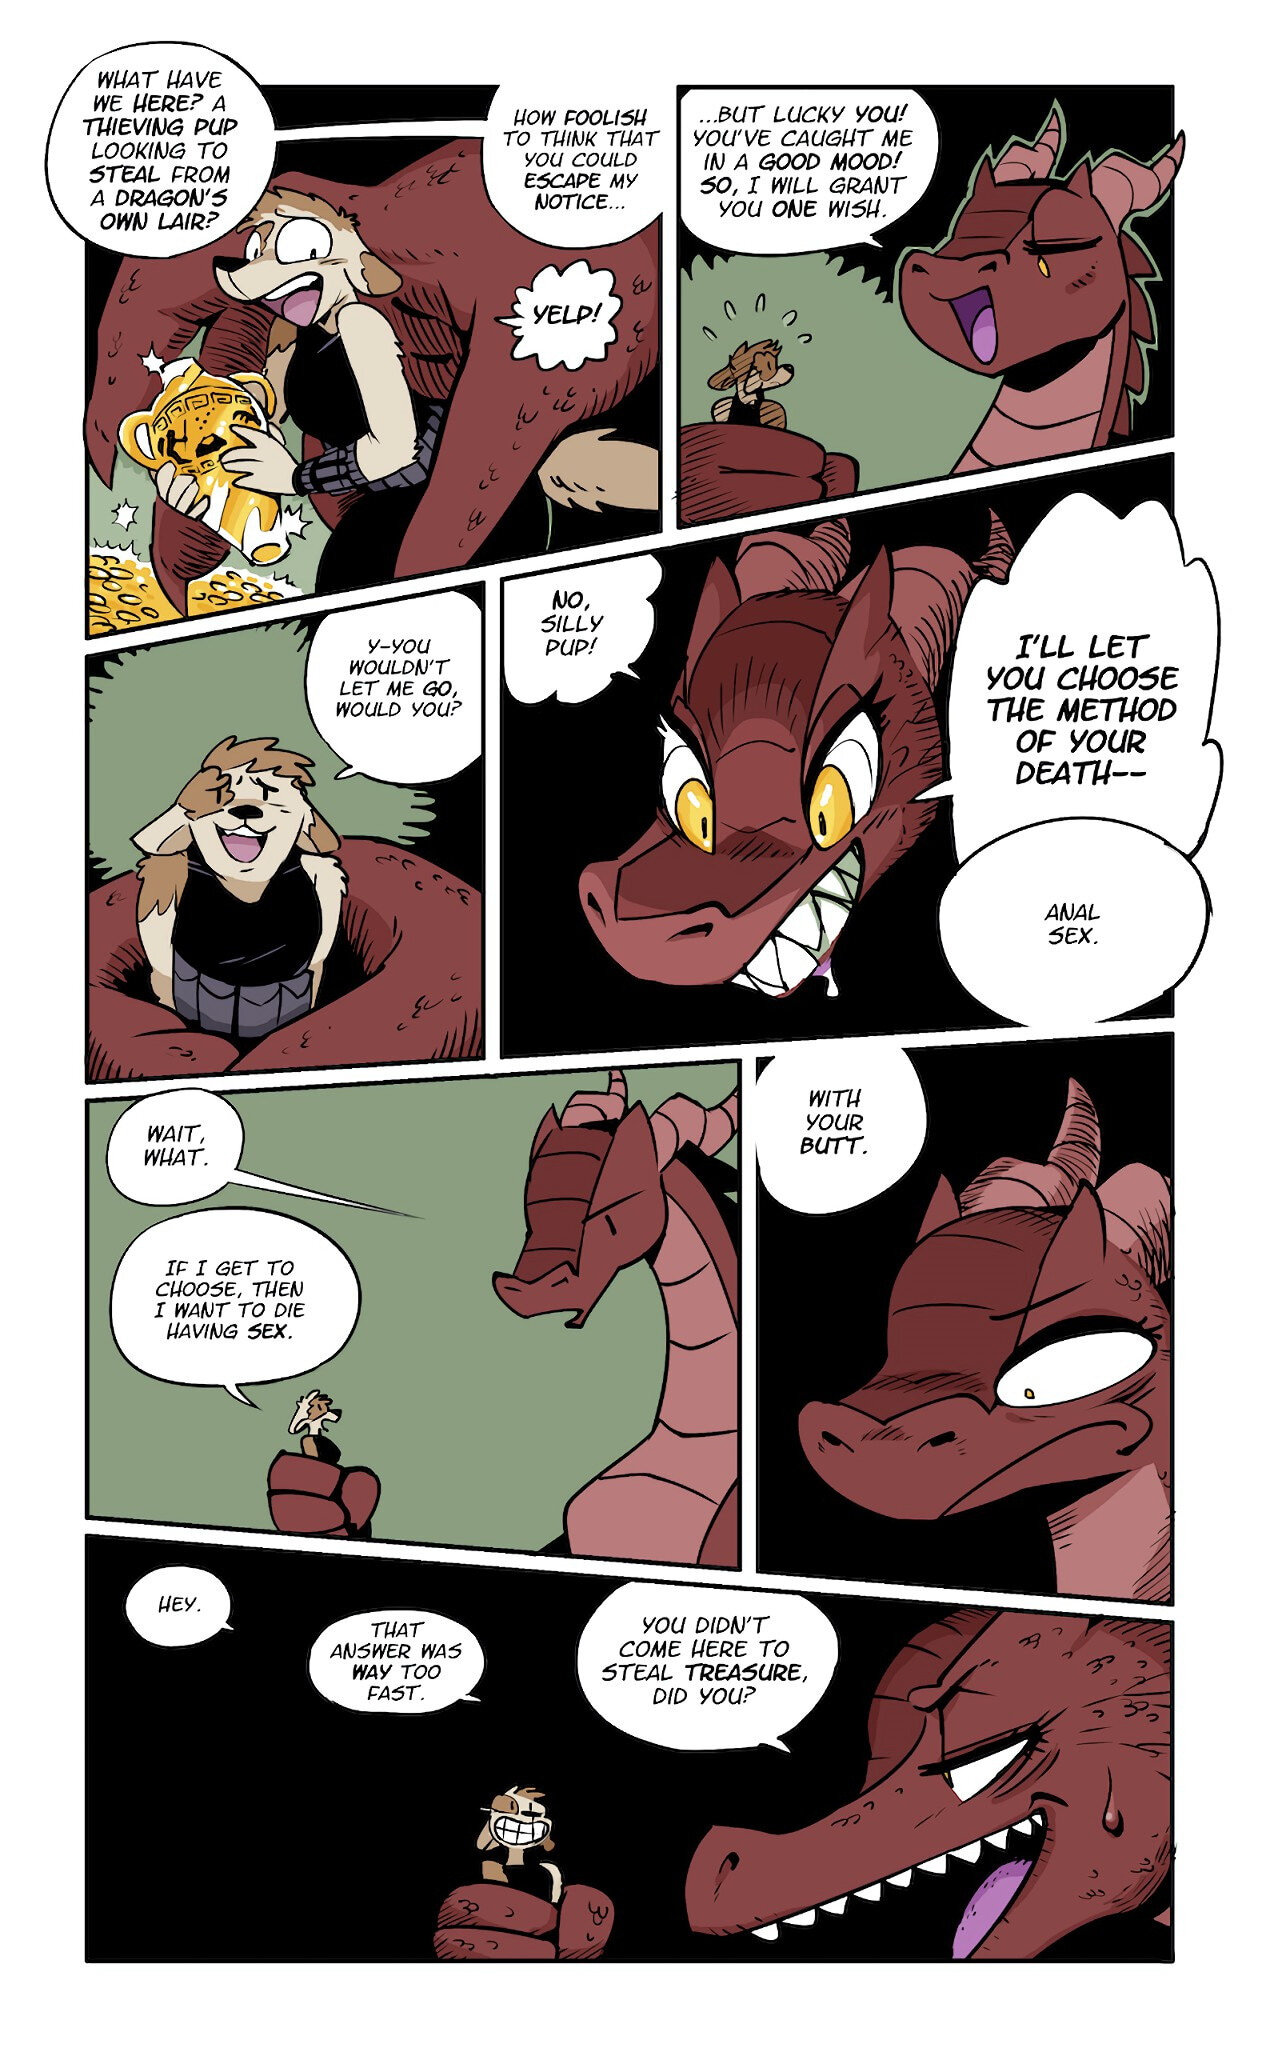 Death by Dragon Butt - Page 1